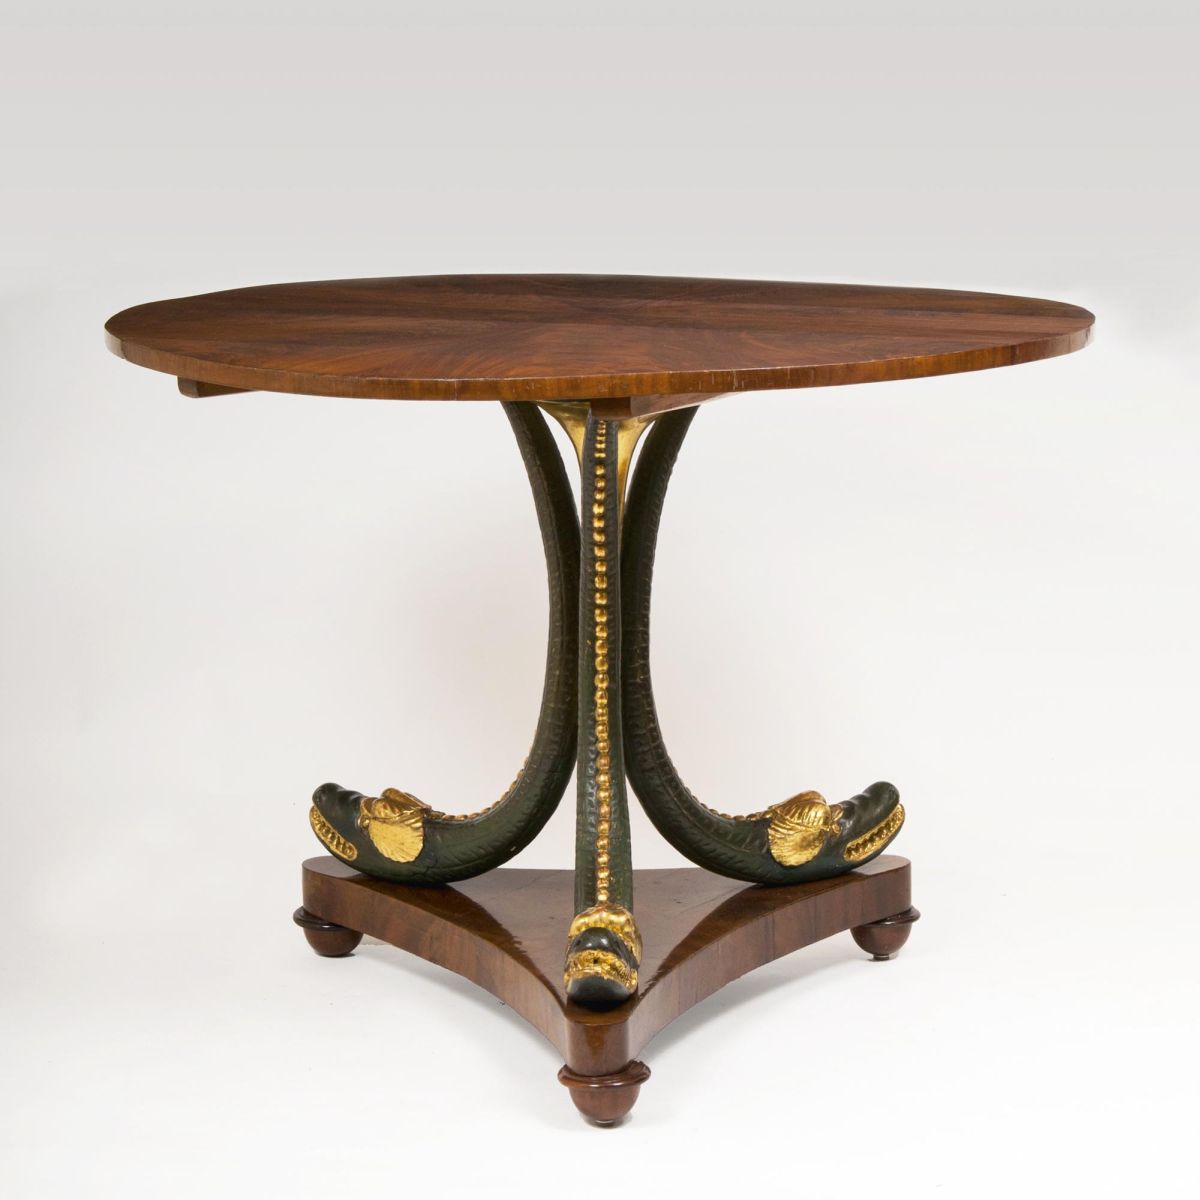 An Extraordinary Charles X Salon Table 'Table aux Chimères'